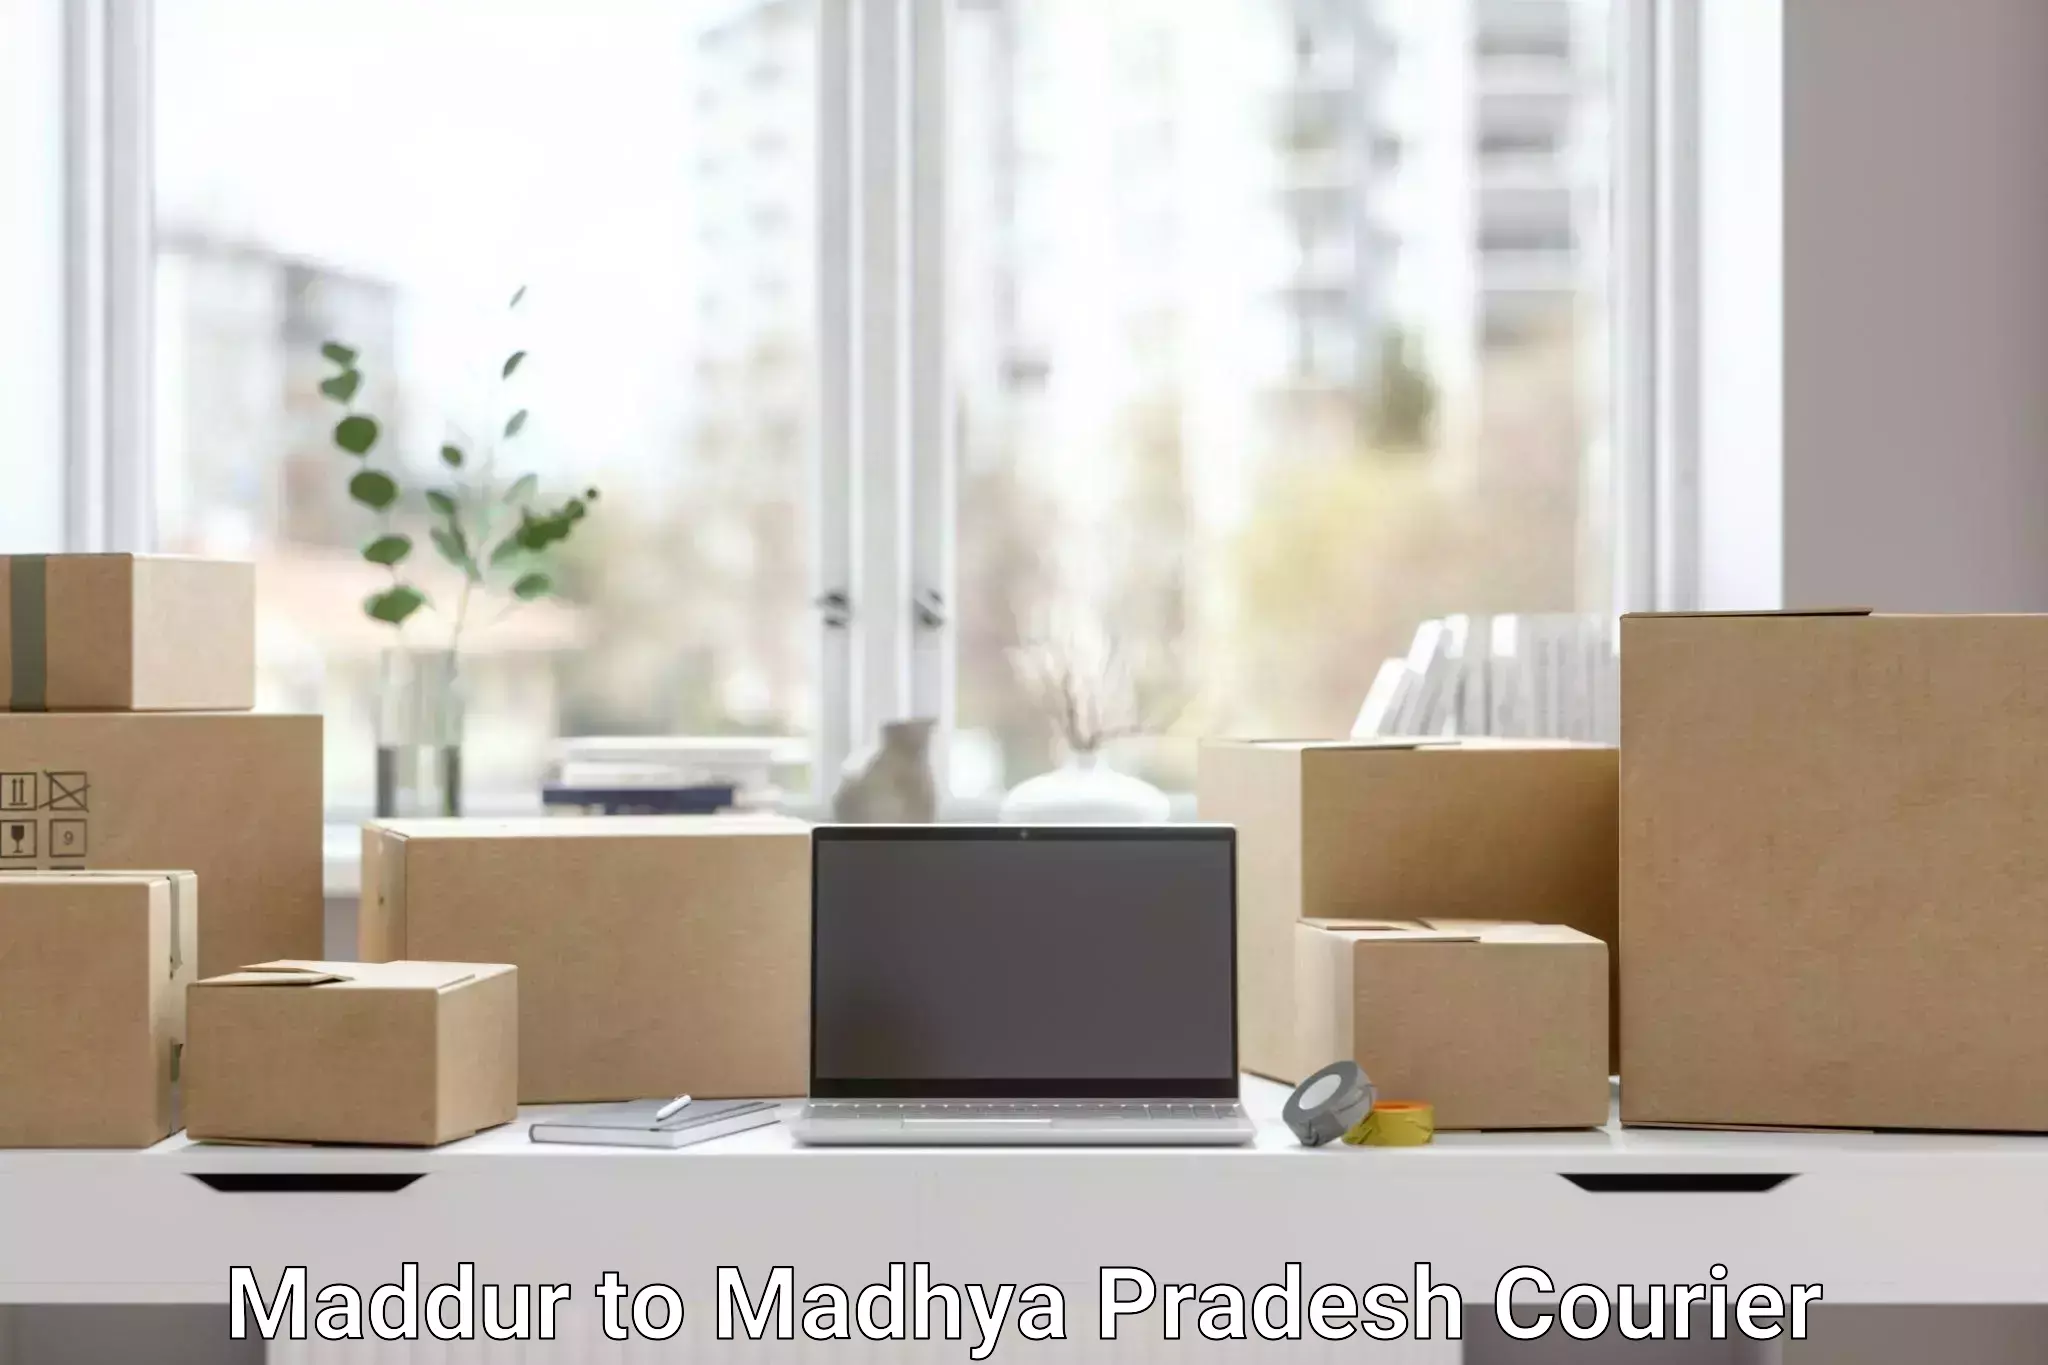 Secure shipping methods Maddur to Depalpur